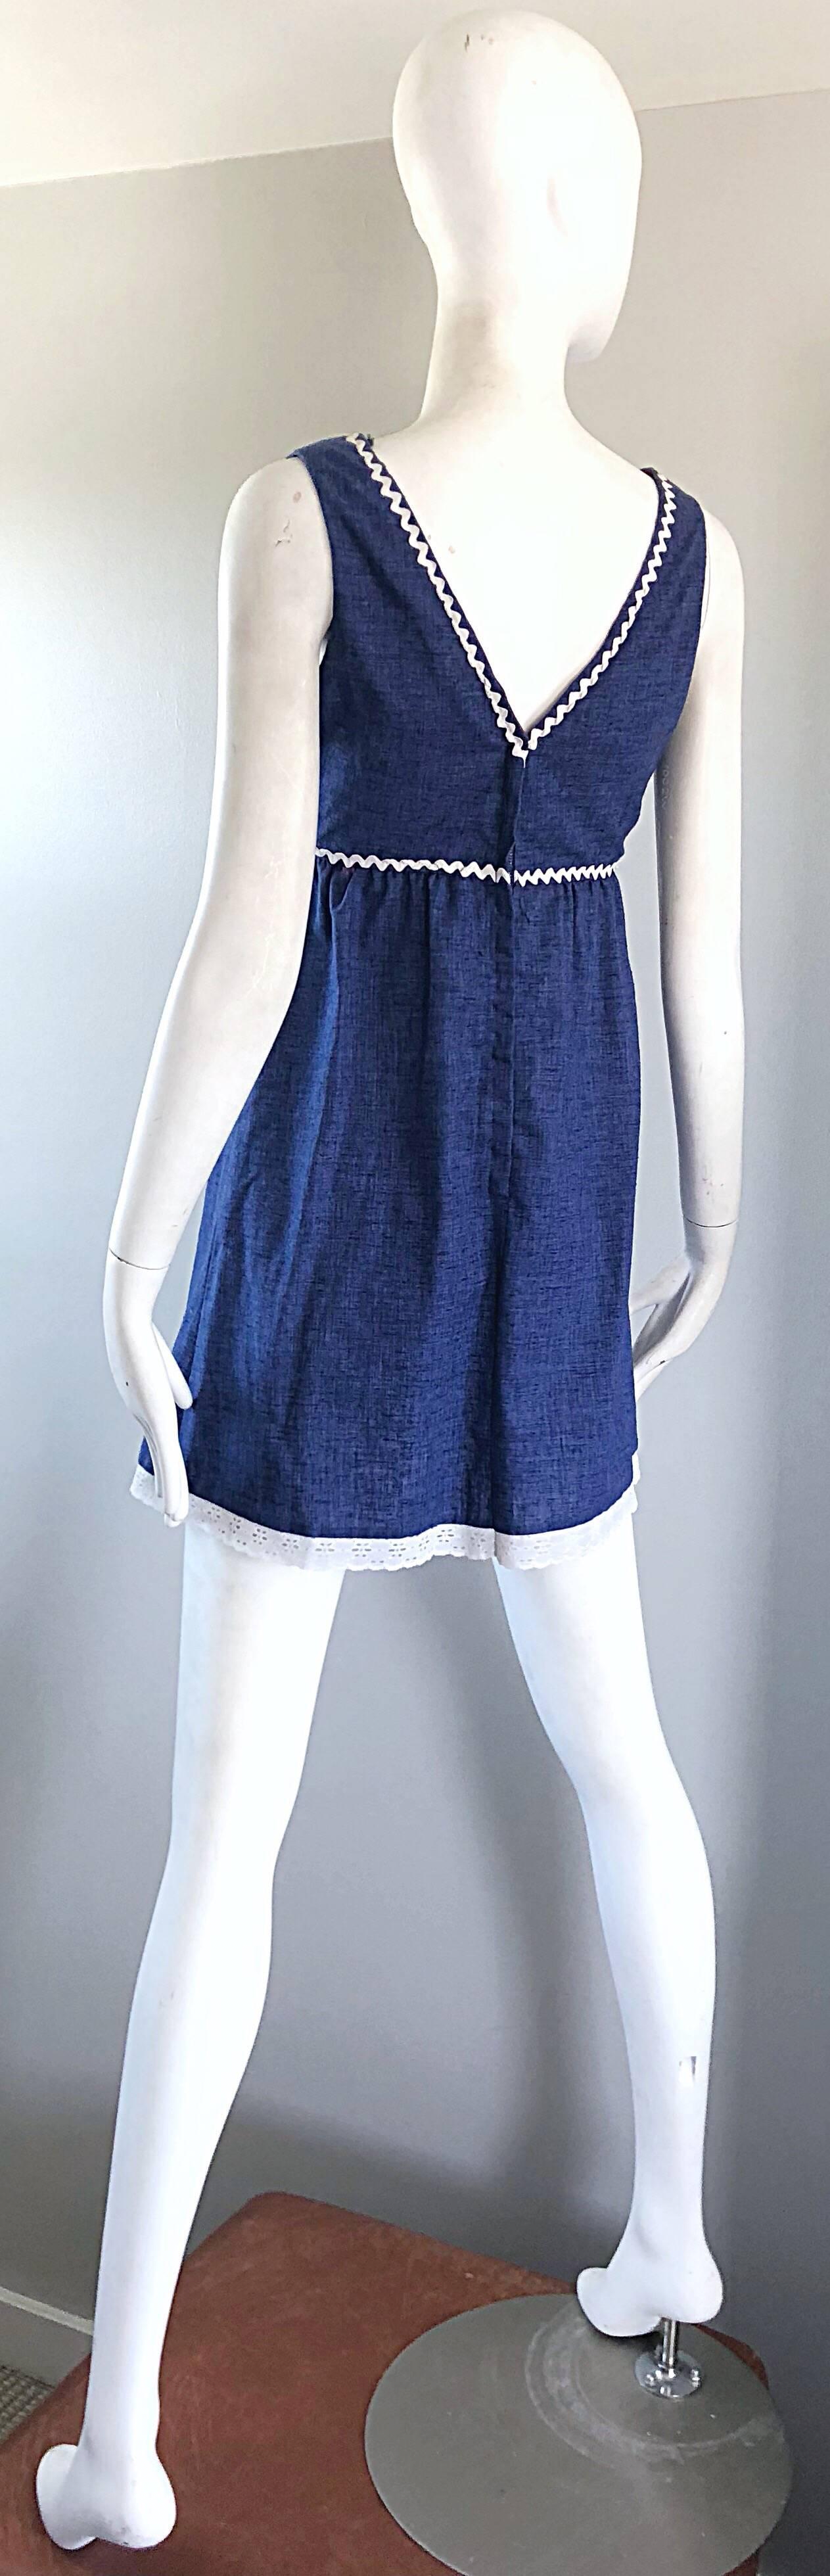 1970s Holly Hobbie Theme Red, White and Blue Denim Blue Jean 70s Mini Dress For Sale 4